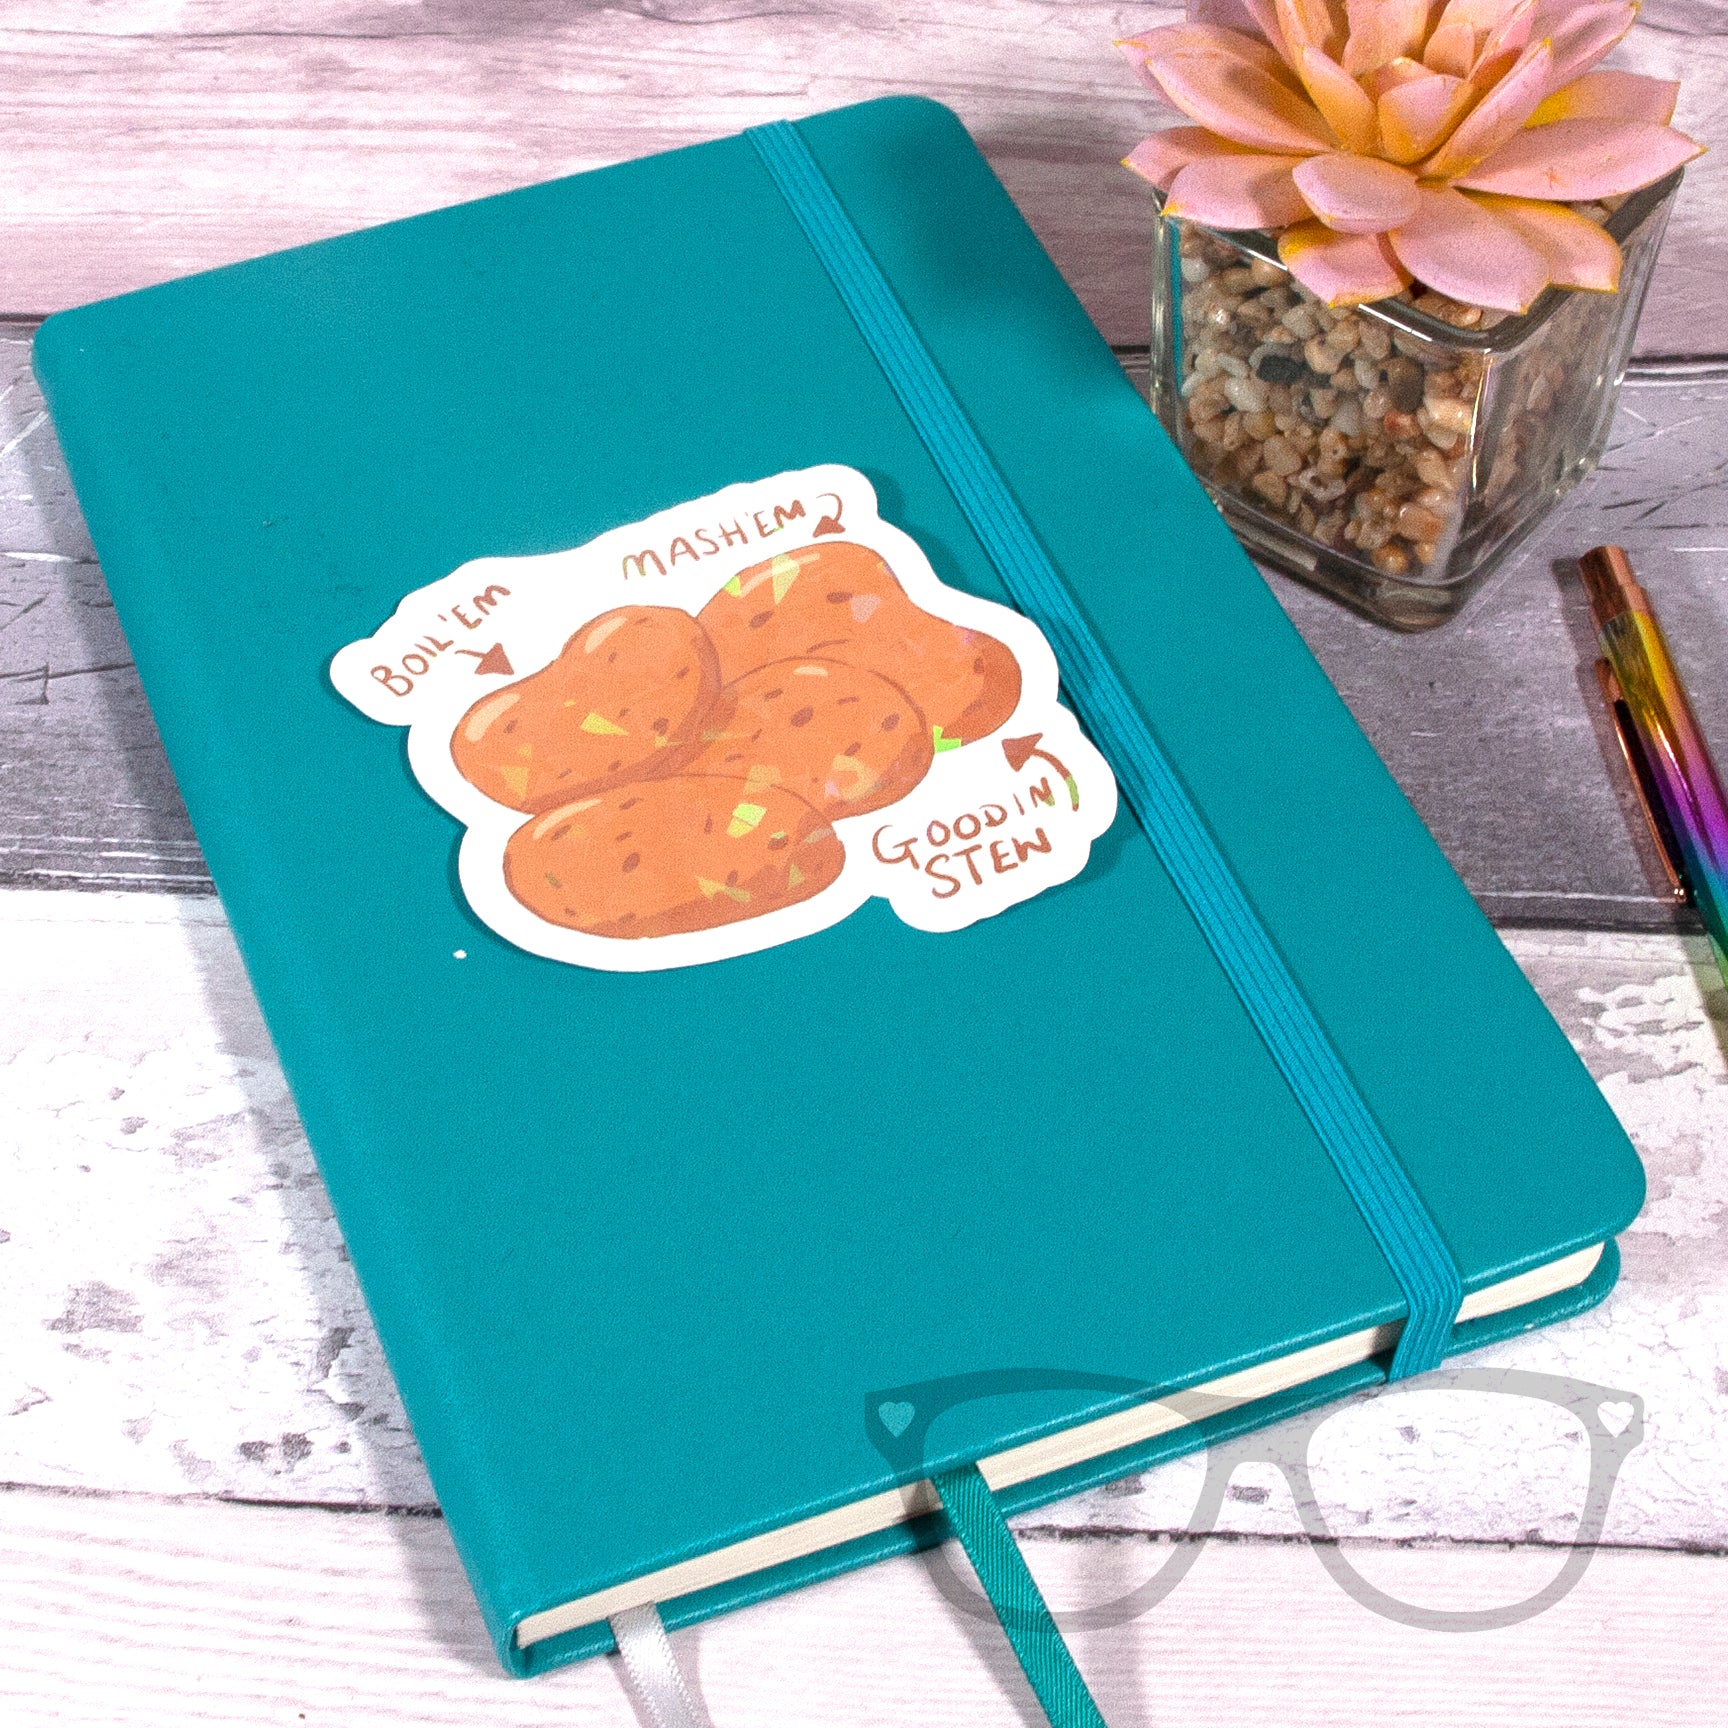 potato sticker with crackled glass sparkle overlay on notebook